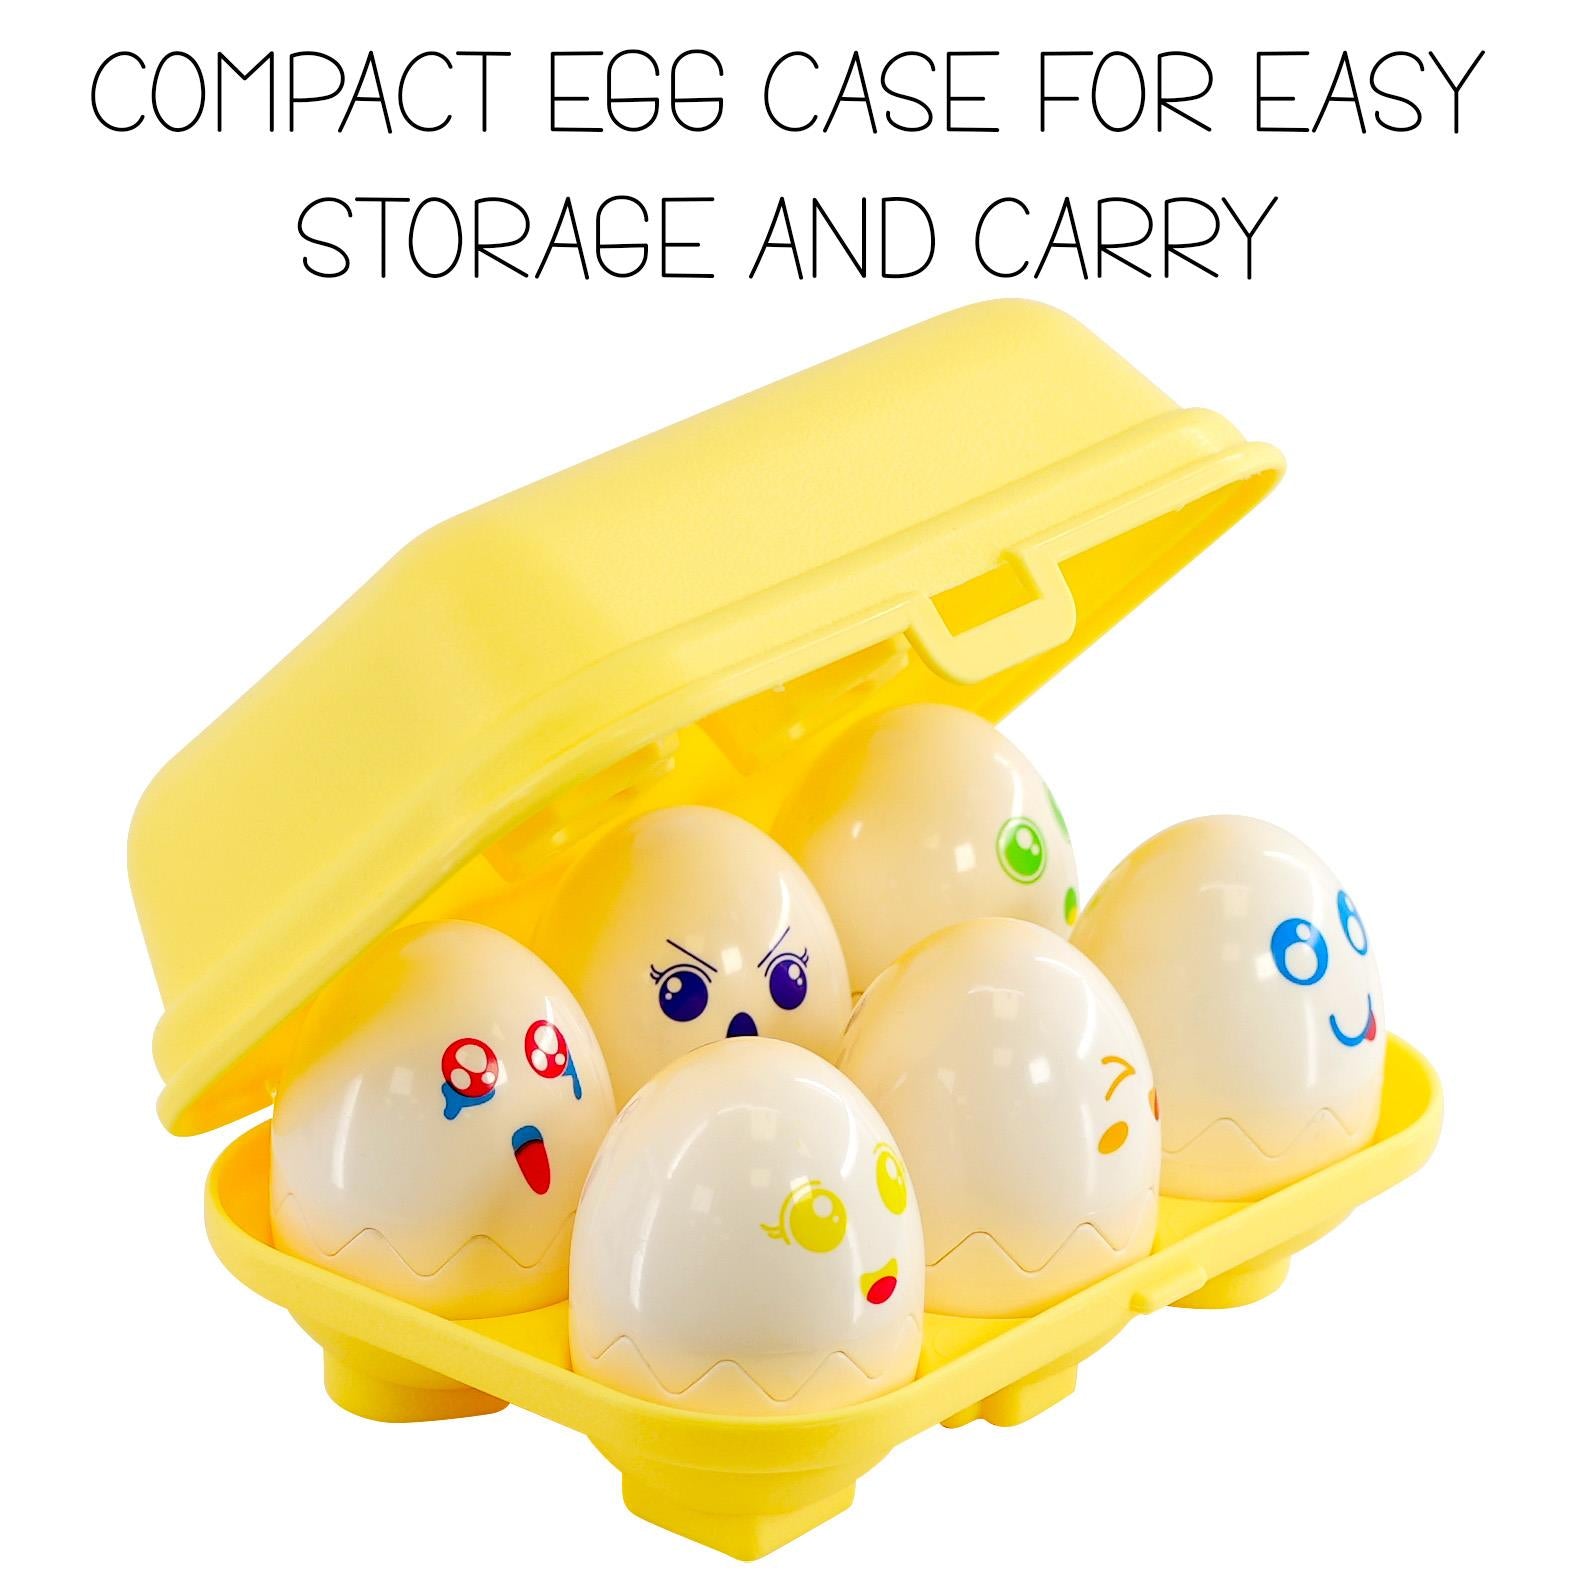 Hide n Squeak Matching Eggs Color & Shape Sorter by The Magic Toy Shop - The Magic Toy Shop